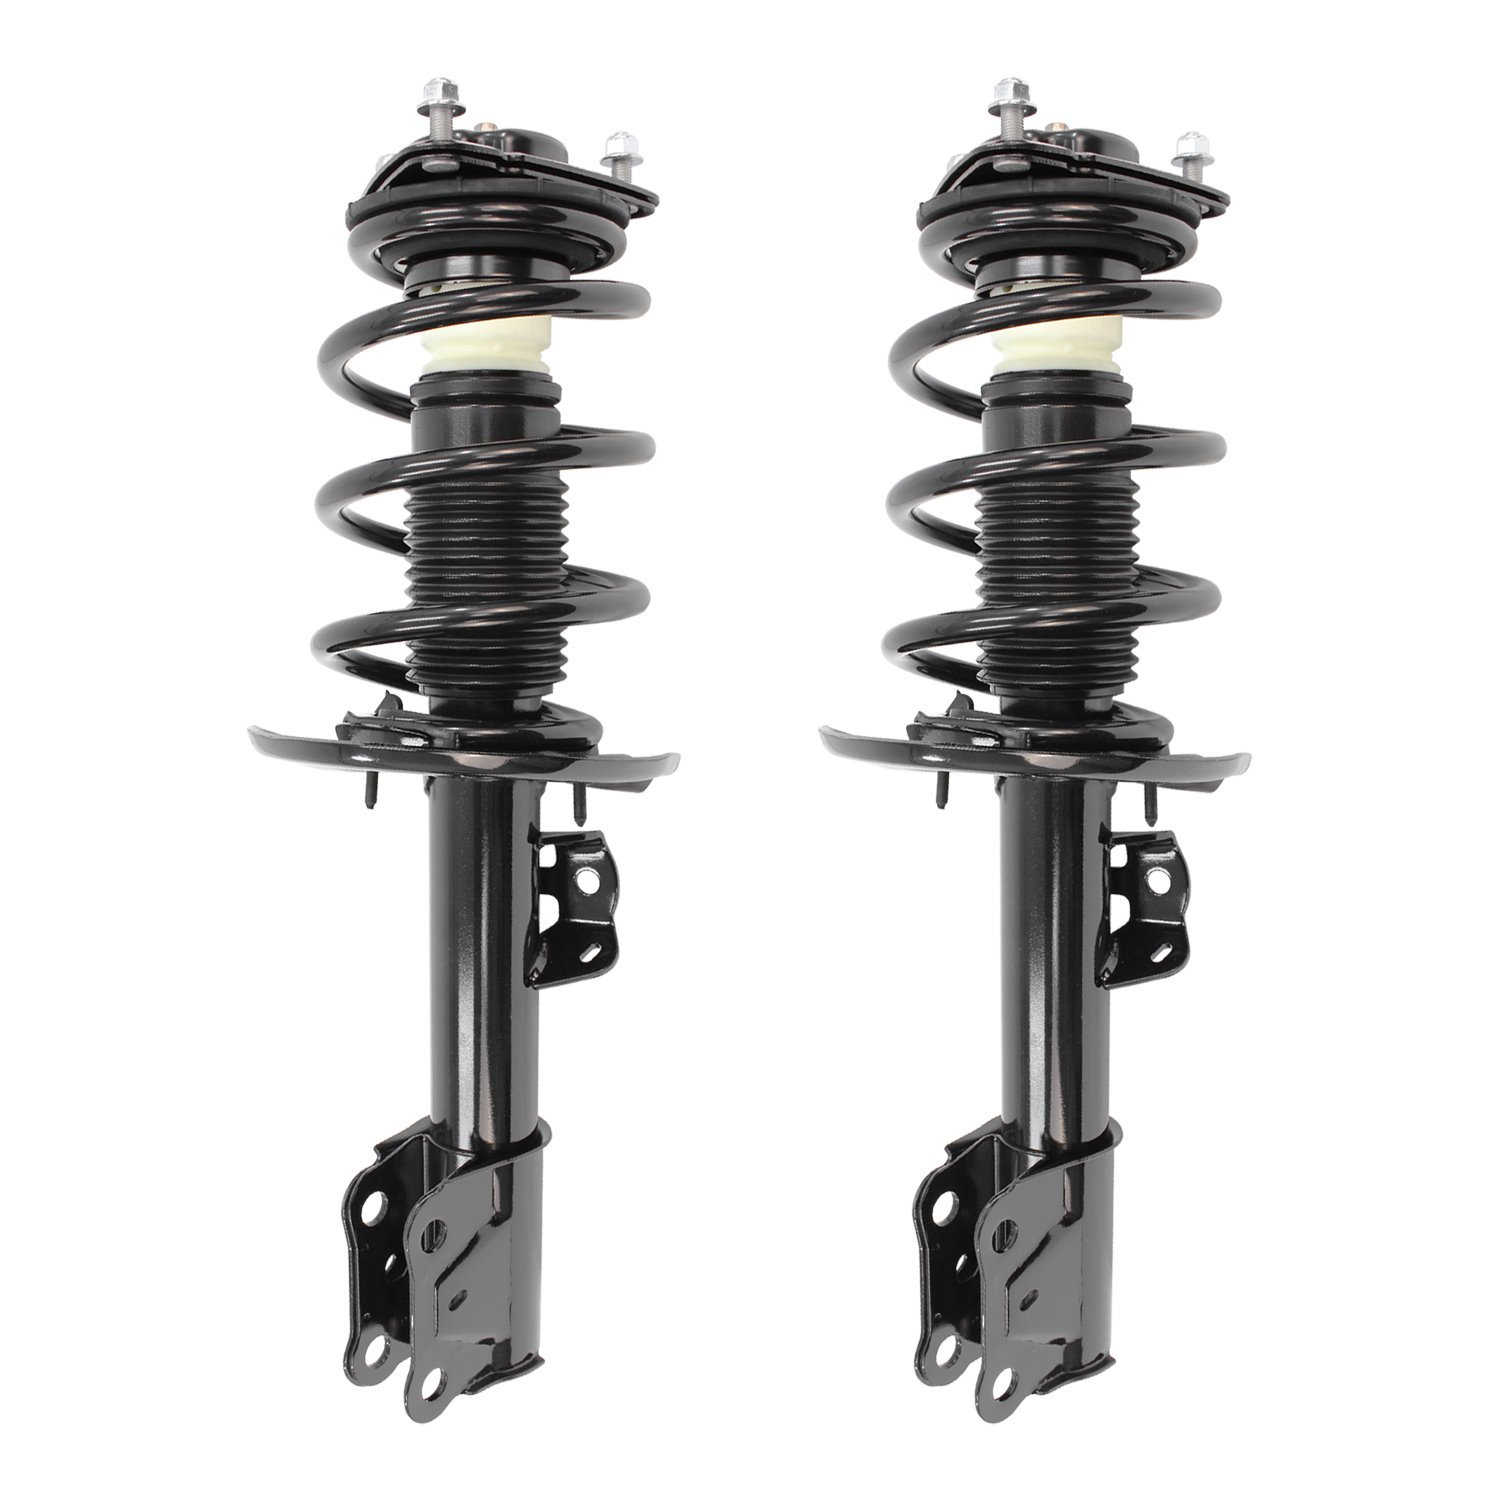 2-13540-001 Front Suspension Strut & Coil Spring Assemby Set Fits Select Ford Mustang